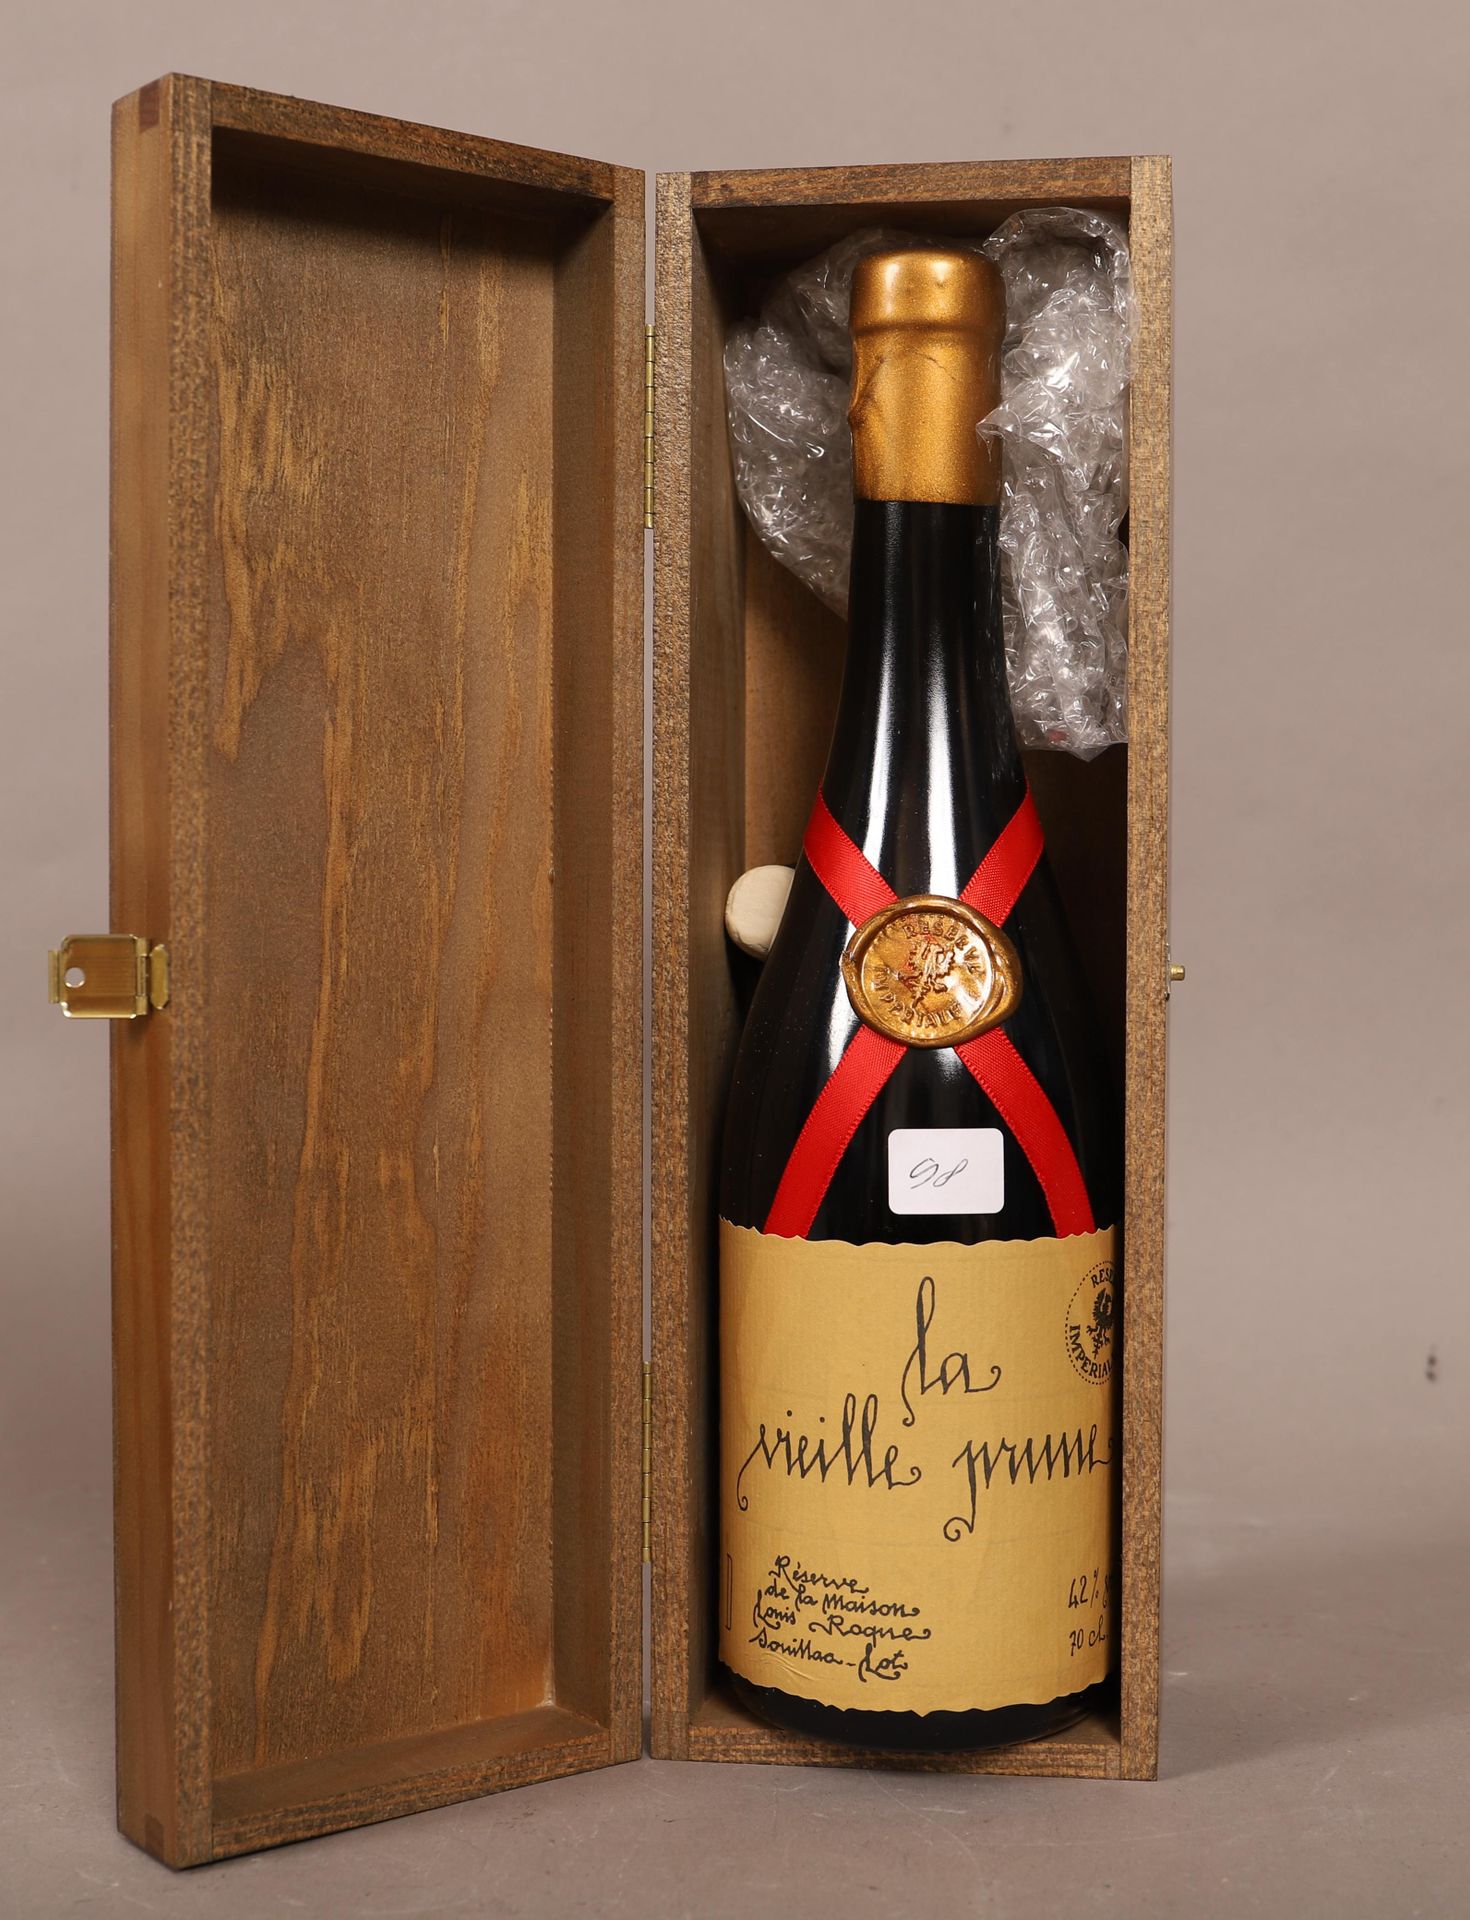 Null The Old Plum (x1)

Imperial Reserve

In its original box

0,70 L